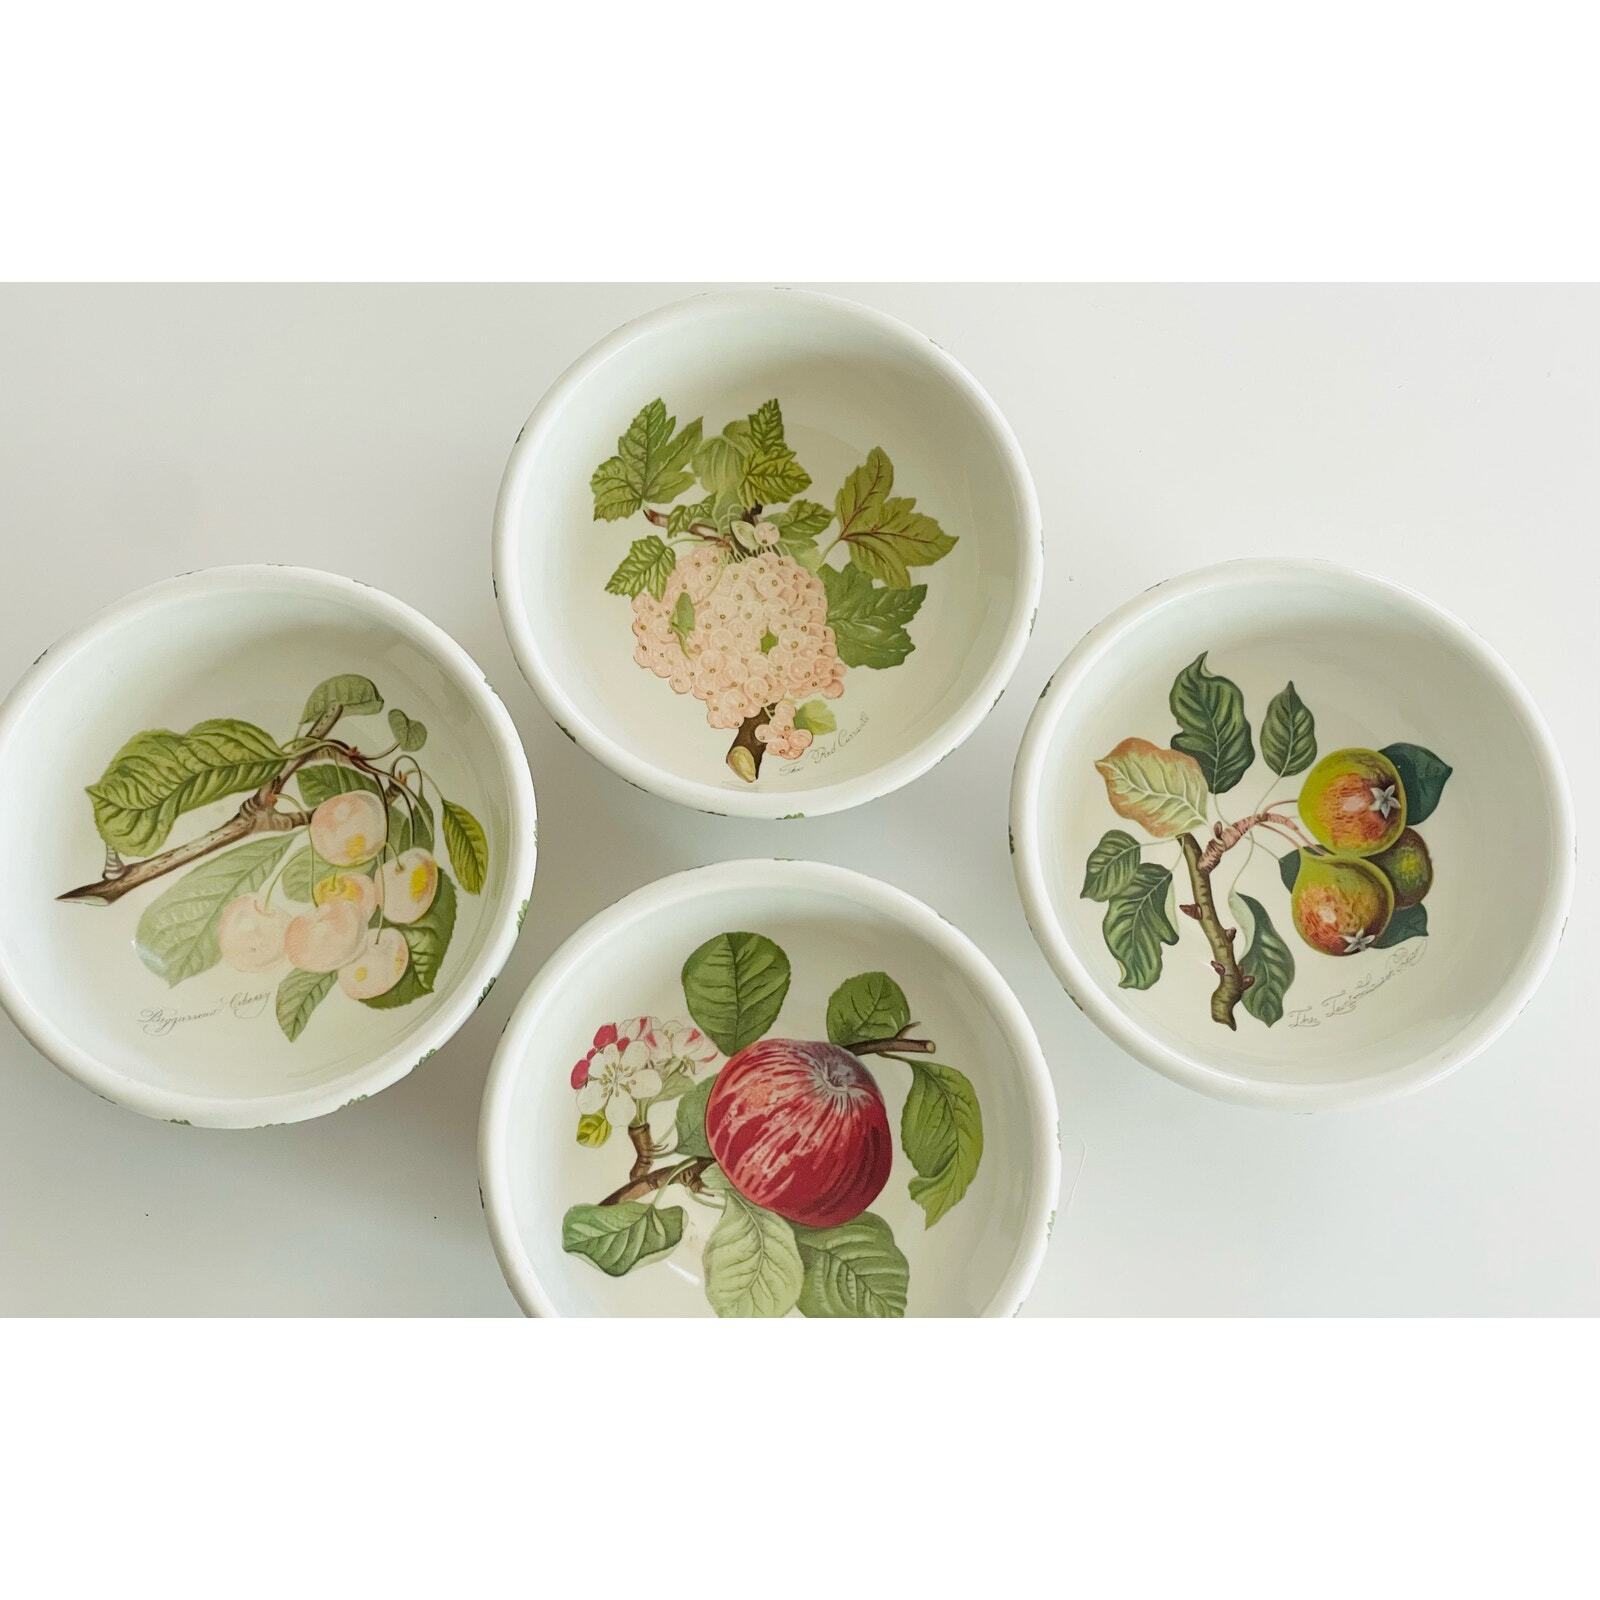 Pomona Fruit Collection by Portmeirion set of 4 Fine Earthenware 5.5” Bowls